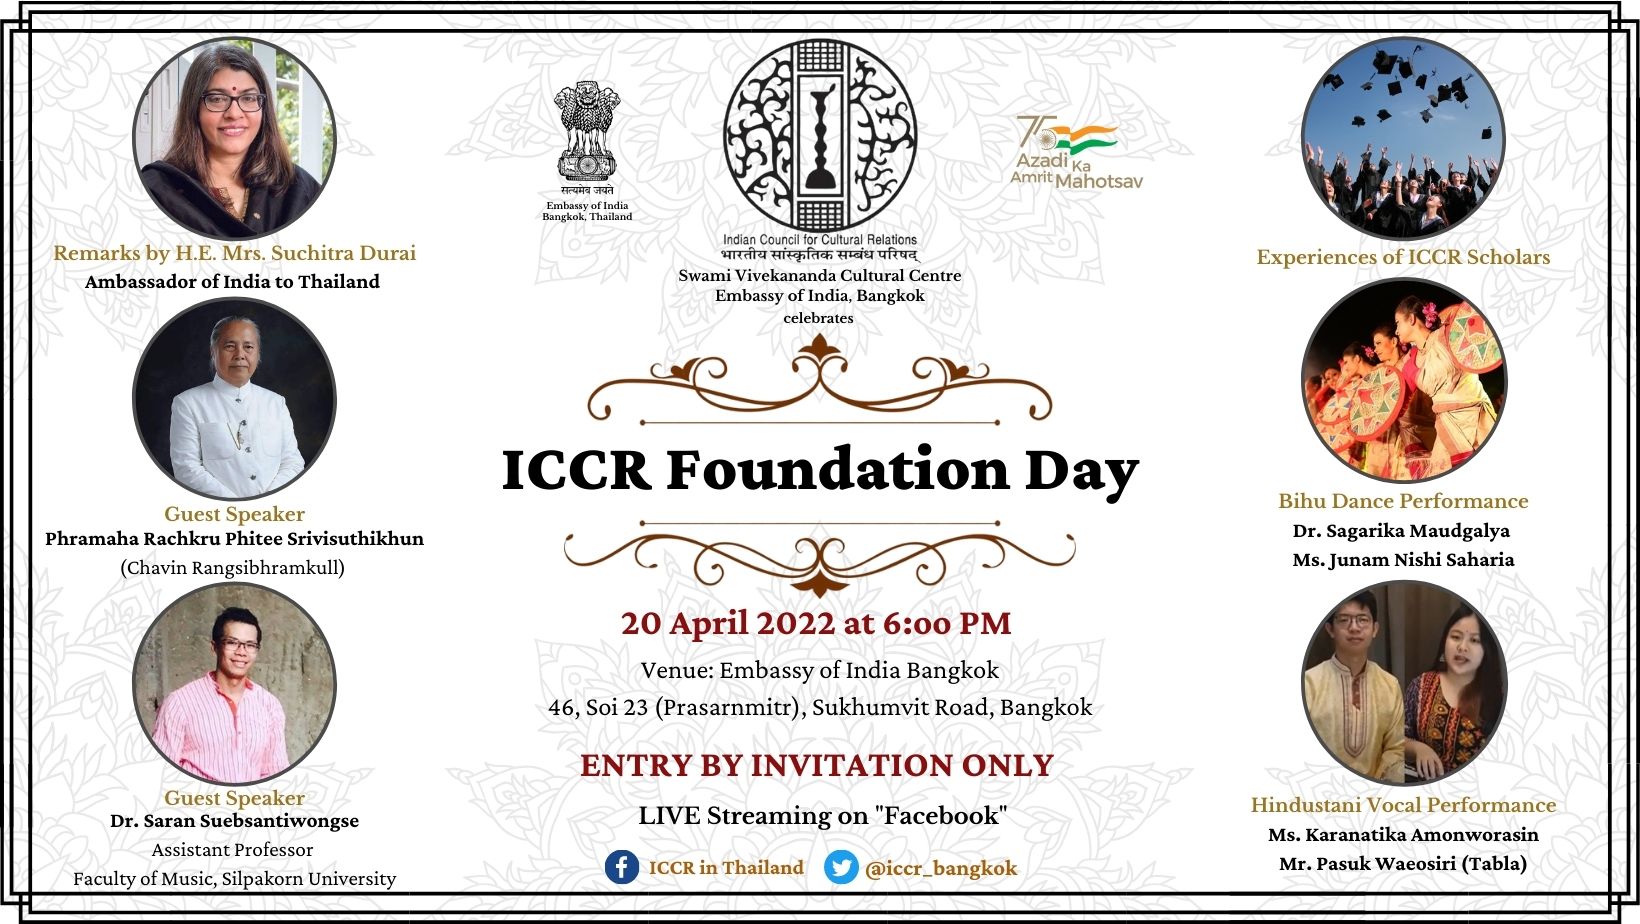 SVCC Bangkok organized a cultural event on the occasion of 72nd ICCR Foundation Day on 20 April 2022 at the Embassy of India, Bangkok.